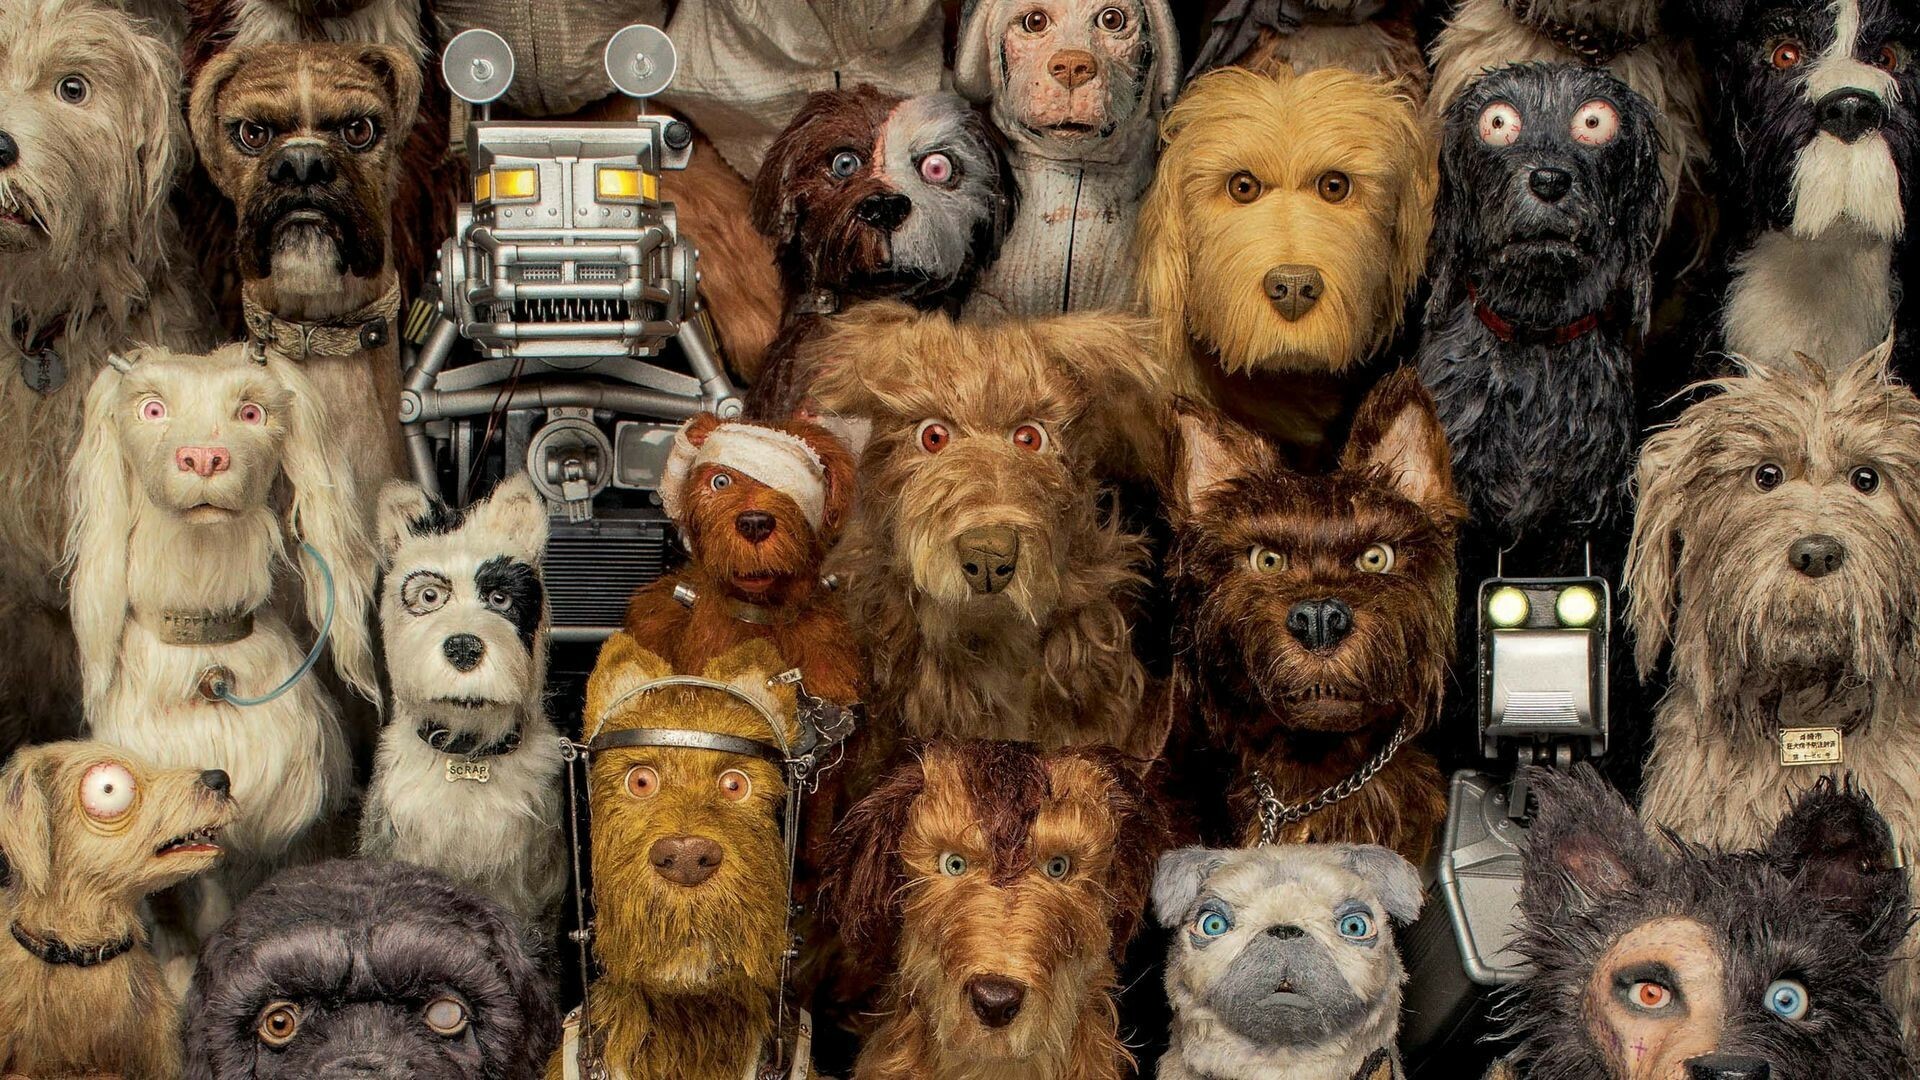 Isle of Dogs: The story of canines exiled to Trash Island, Set in Japan. 1920x1080 Full HD Wallpaper.